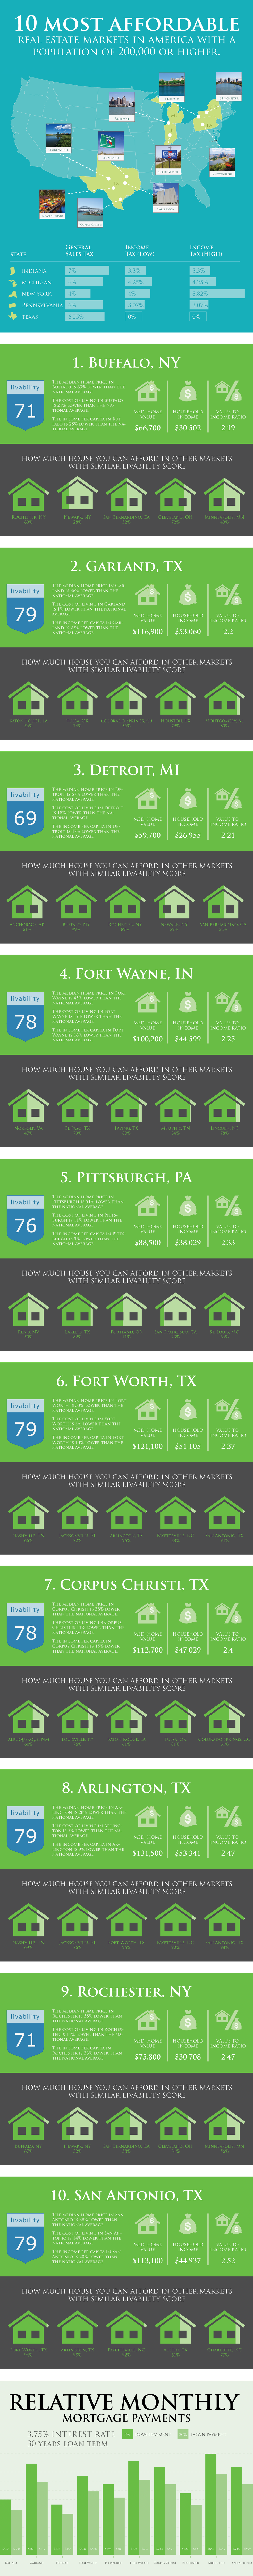 most affordable real estate markets in america infographic